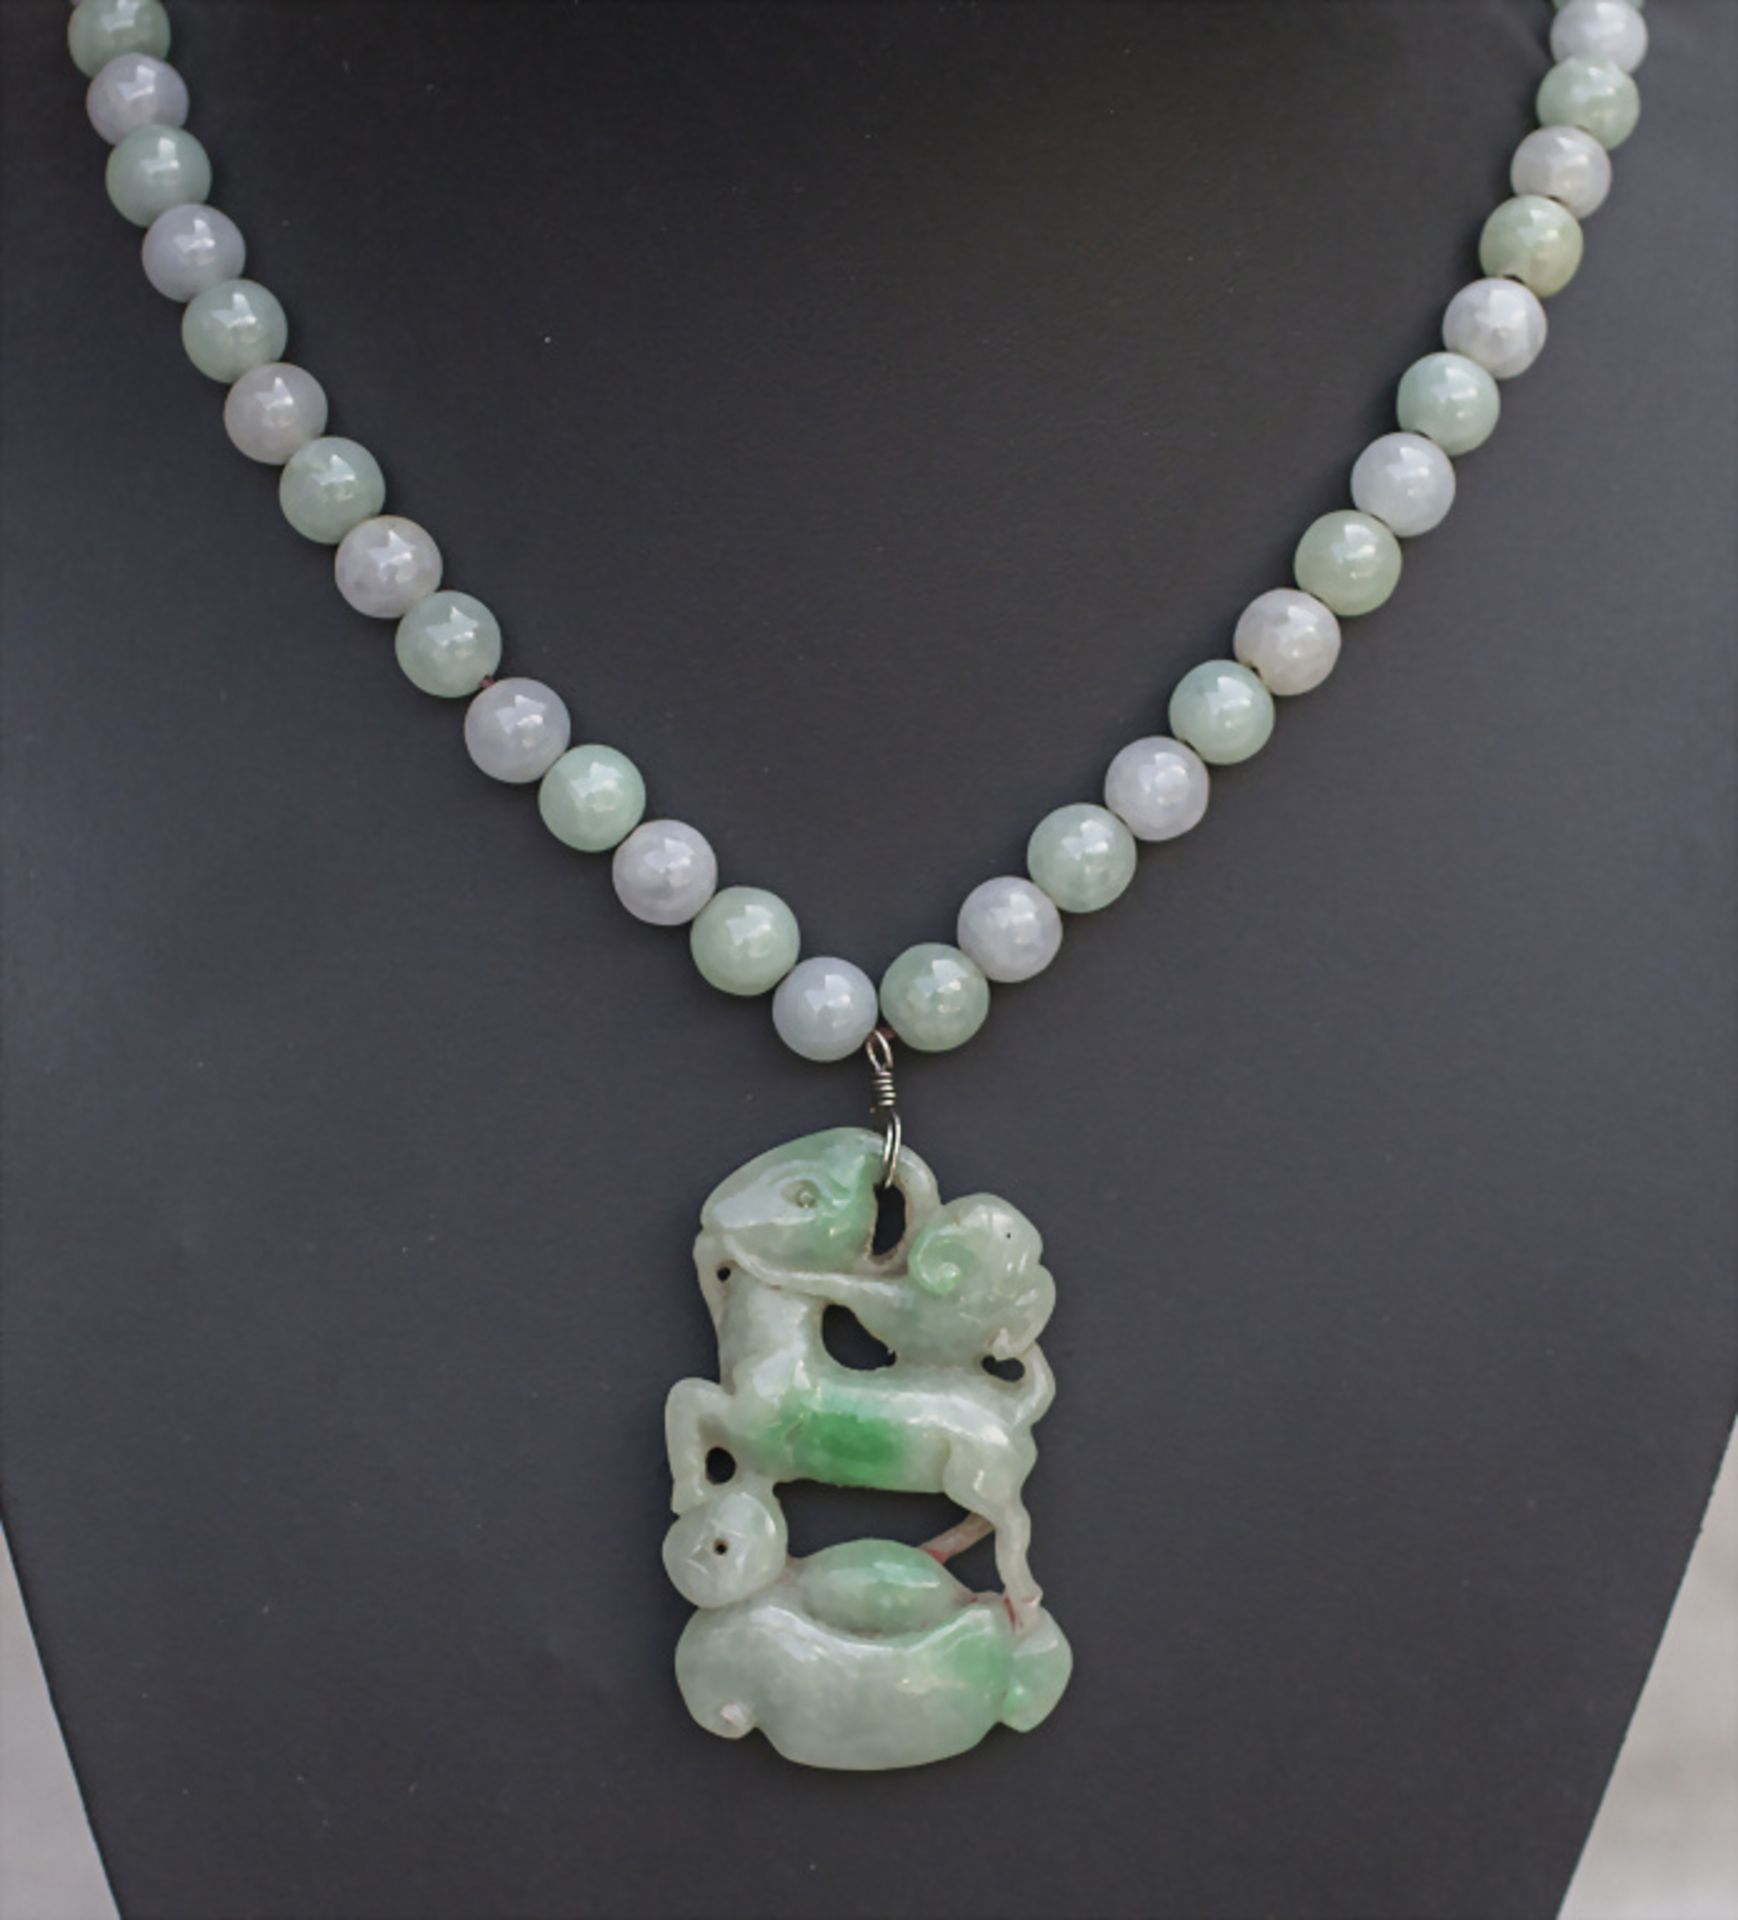 Jadekette mit Glückssymbol / A jade necklace with a lucky symbol, China, Qing-Dynastie (1644-1911)